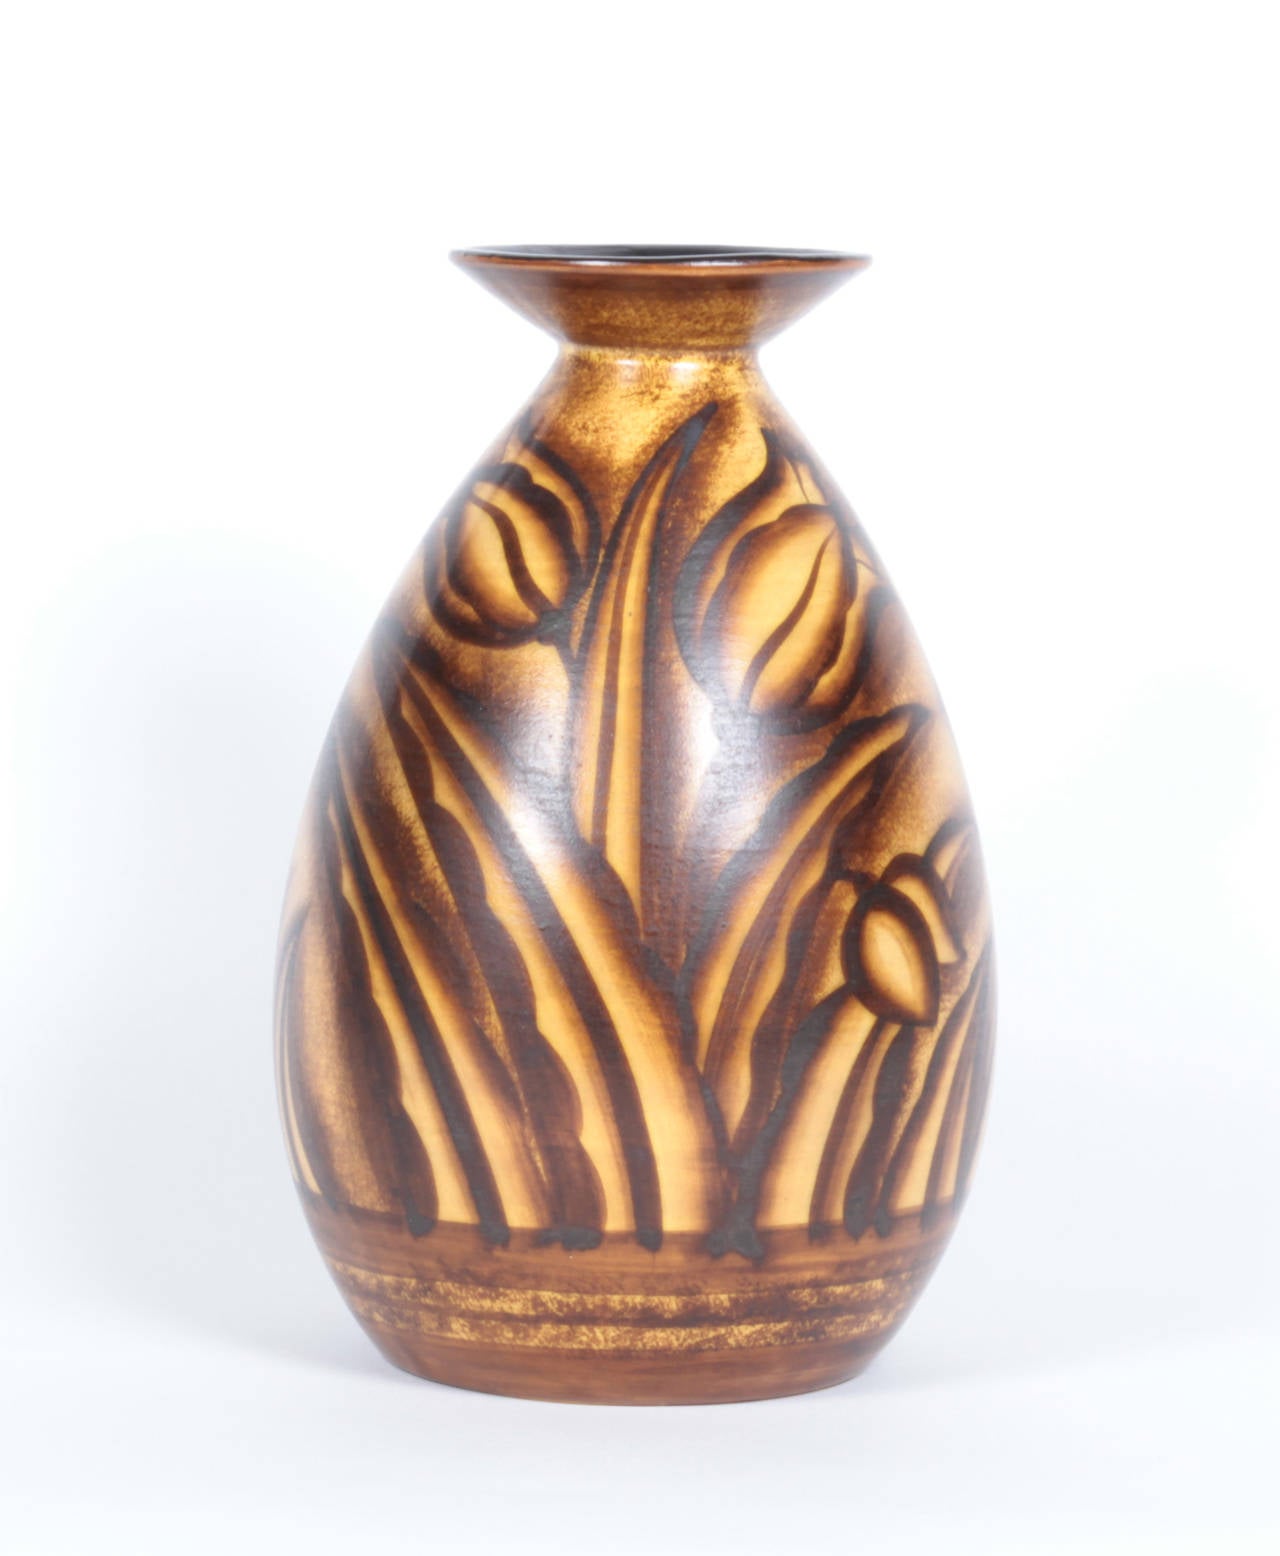 Charles Catteau (1880-1966).
Boch Freres Keramis La Louviere Belgium.

Tulip vase, circa 1930.

Glazed earthenware with hand-painted decoration of tulips in shades of brown and golden hues.

Marks: “Keramis” Made in Belgium , D. 2524 B,